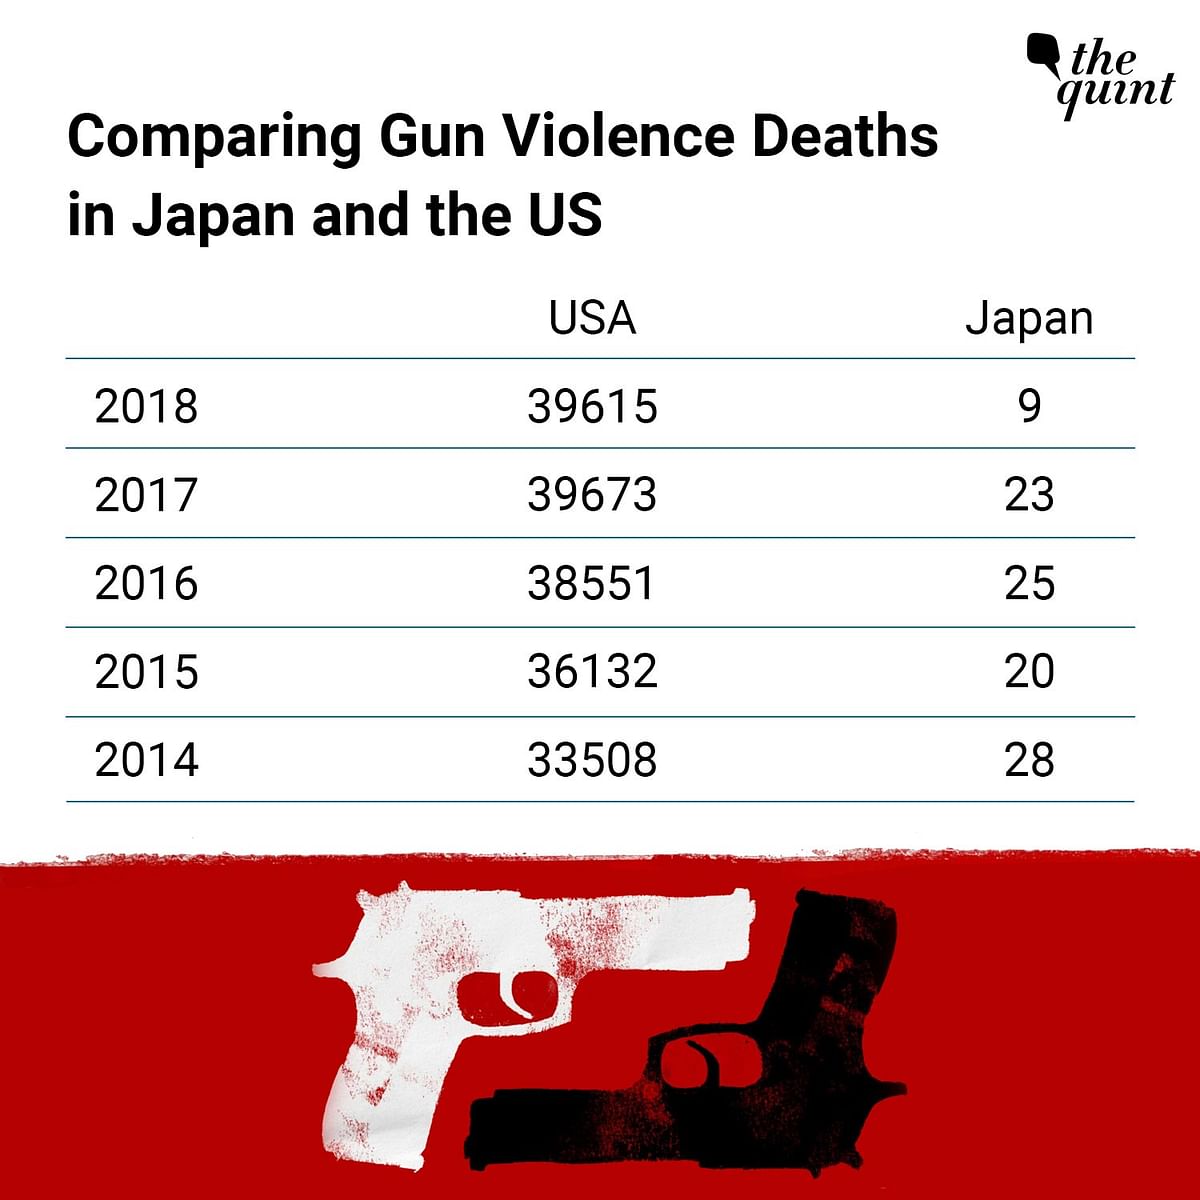 In 2021, just one person died of gun violence in Japan, compared to 45,034 gun deaths in the US in the same year.